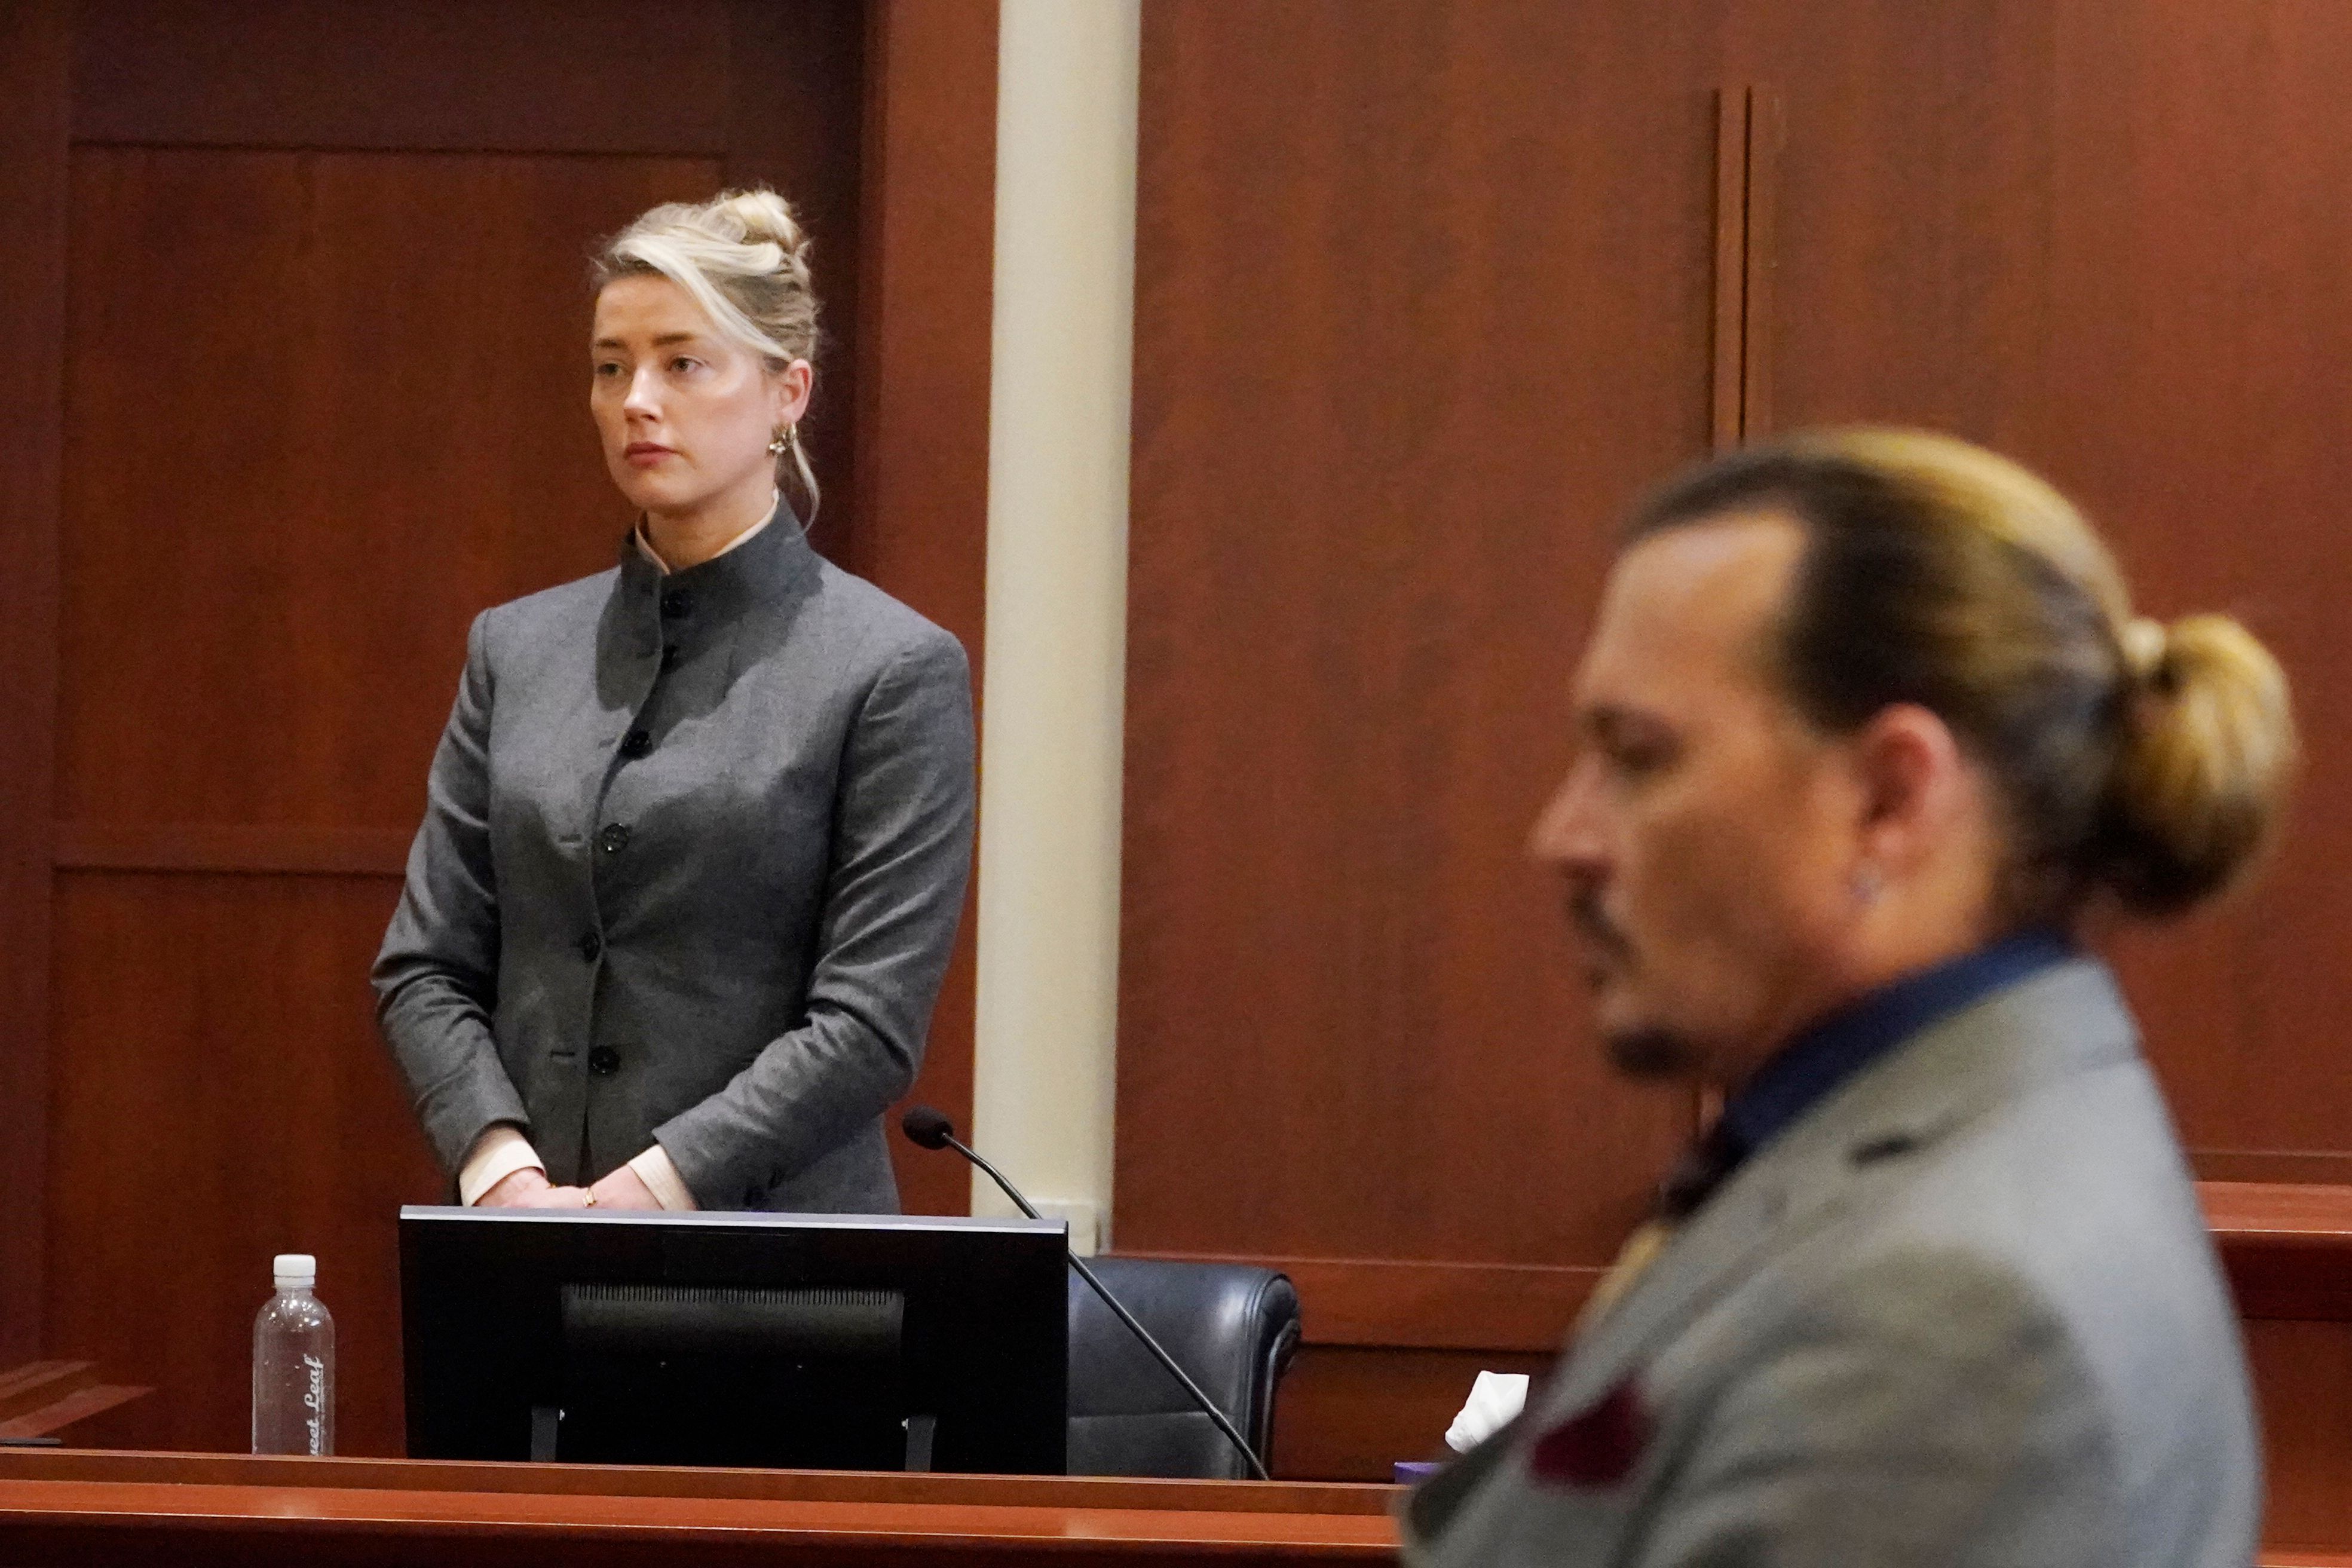 Johnny Depp Expected to Return to Witness Stand in Suit Against Amber Heard – NBC 7 San Diego